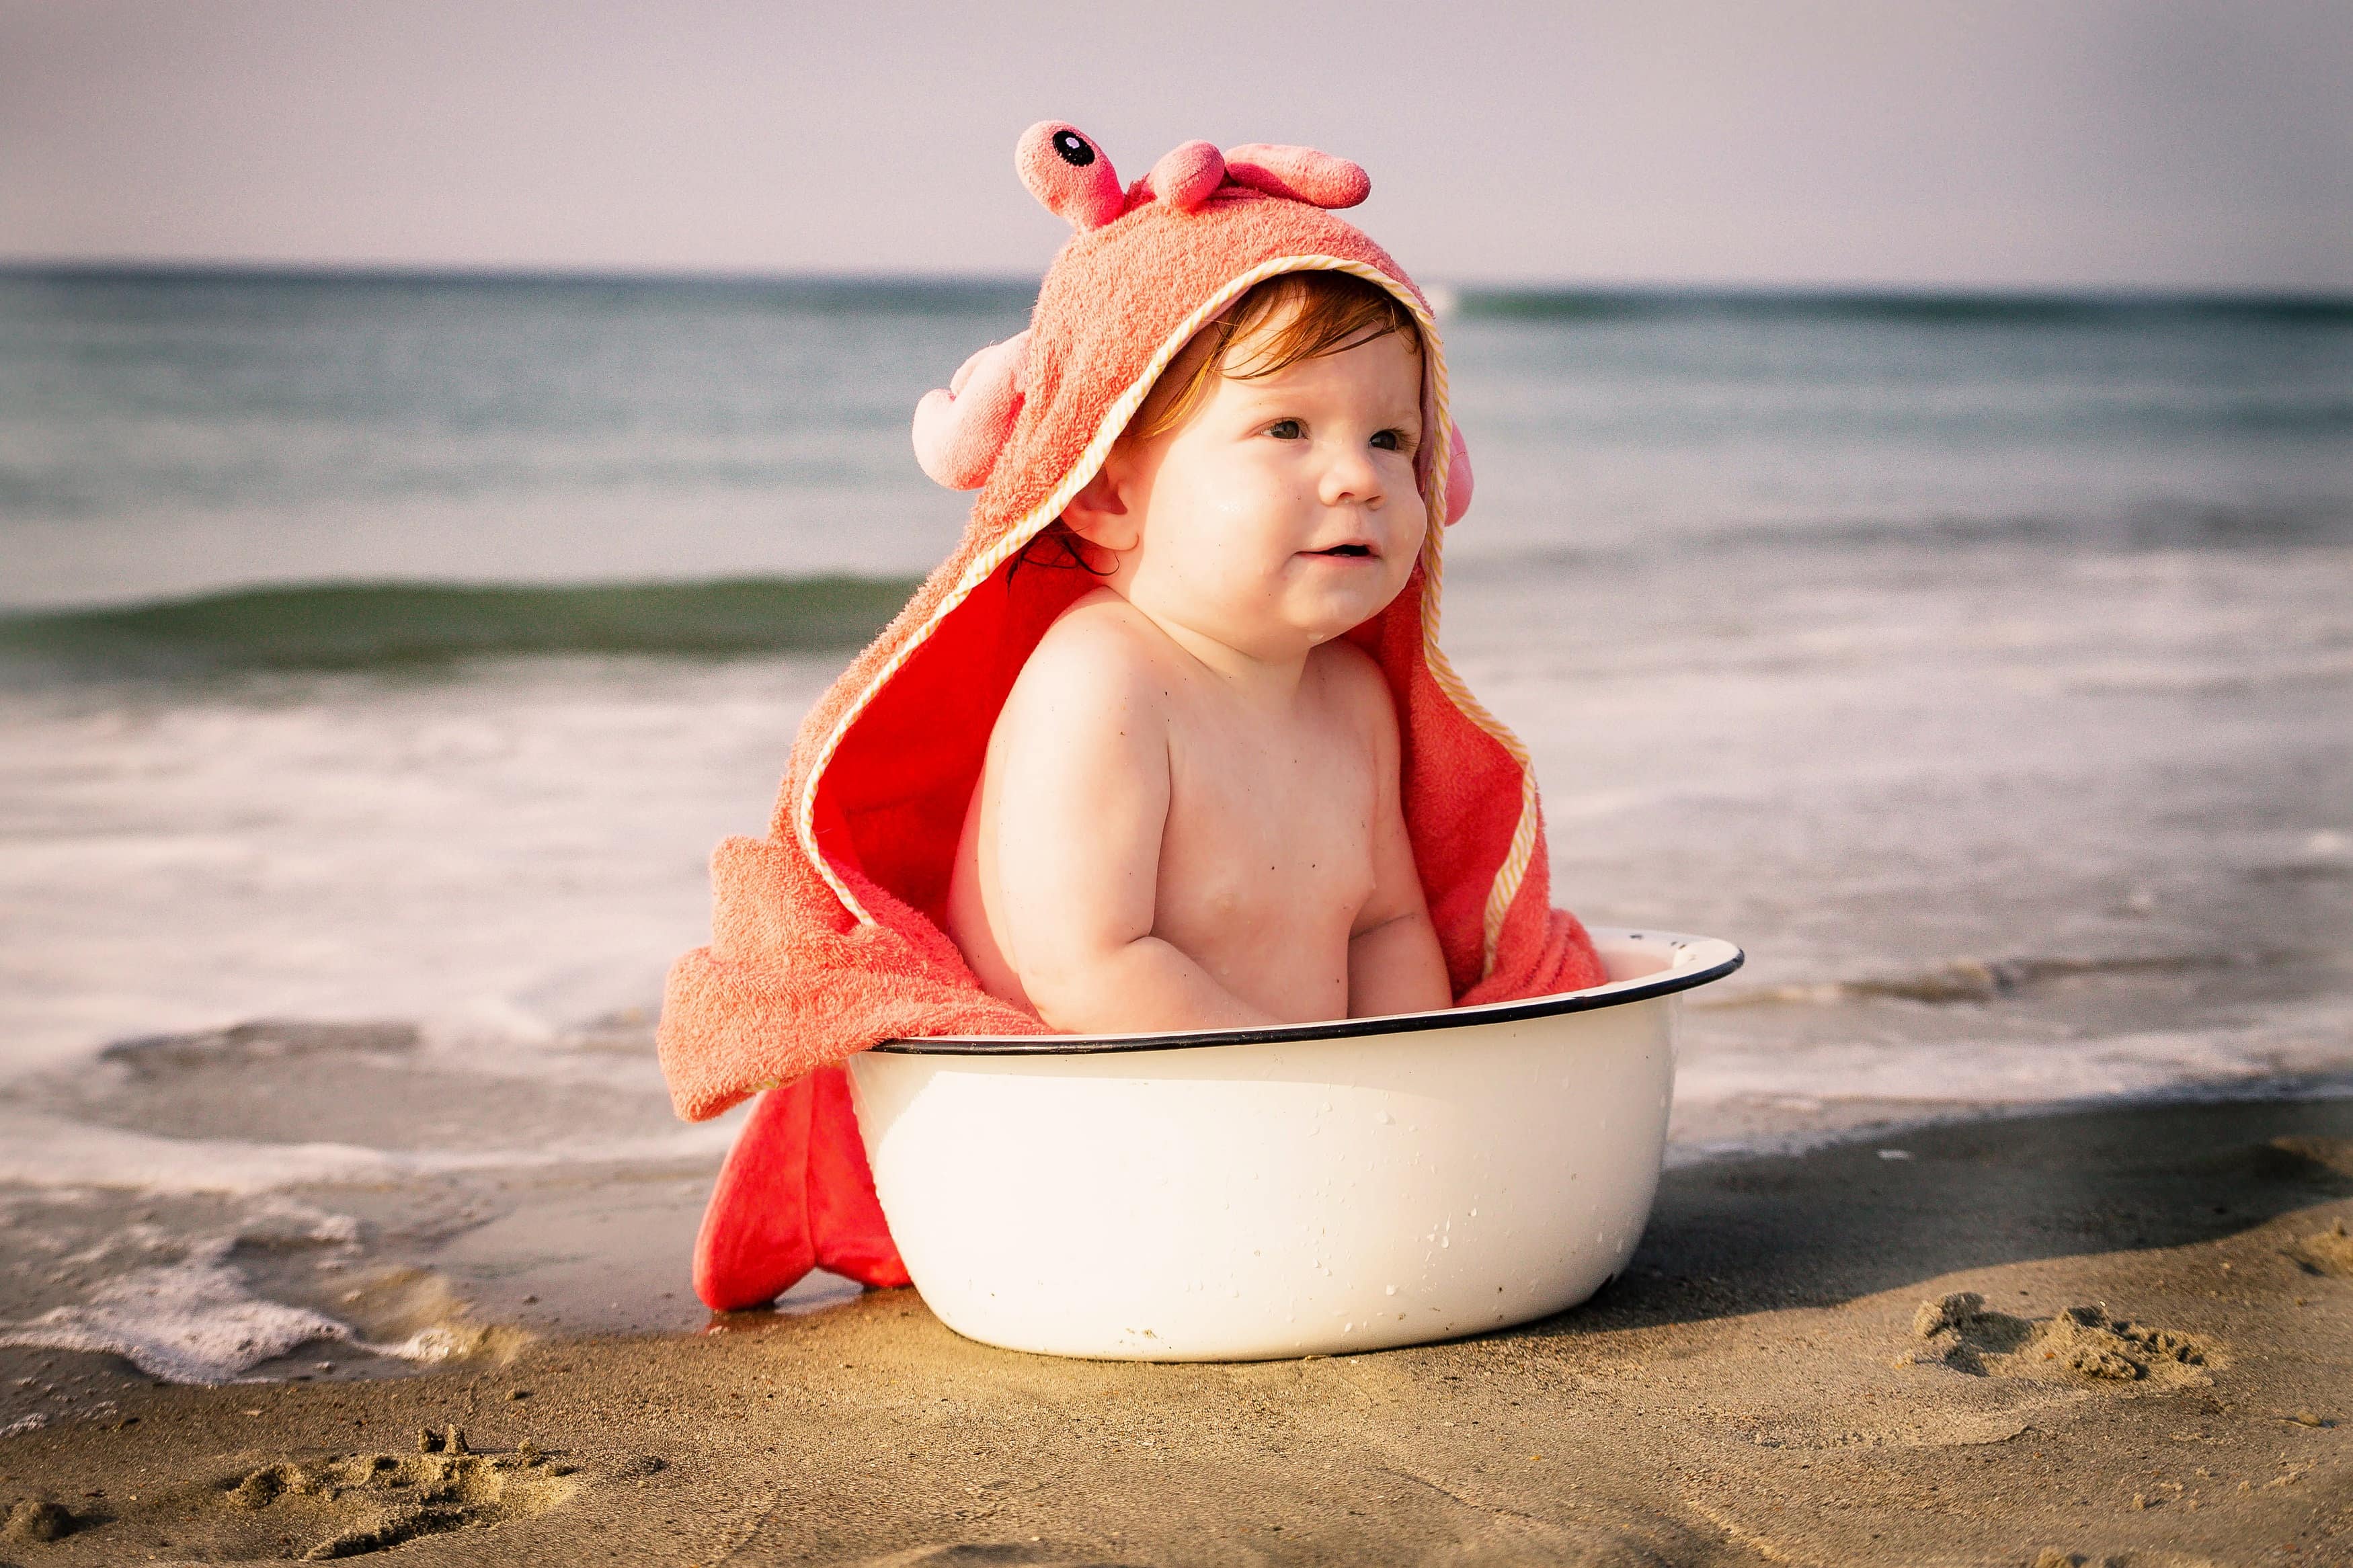 Some of the best baby friendly holidays involve beach fun